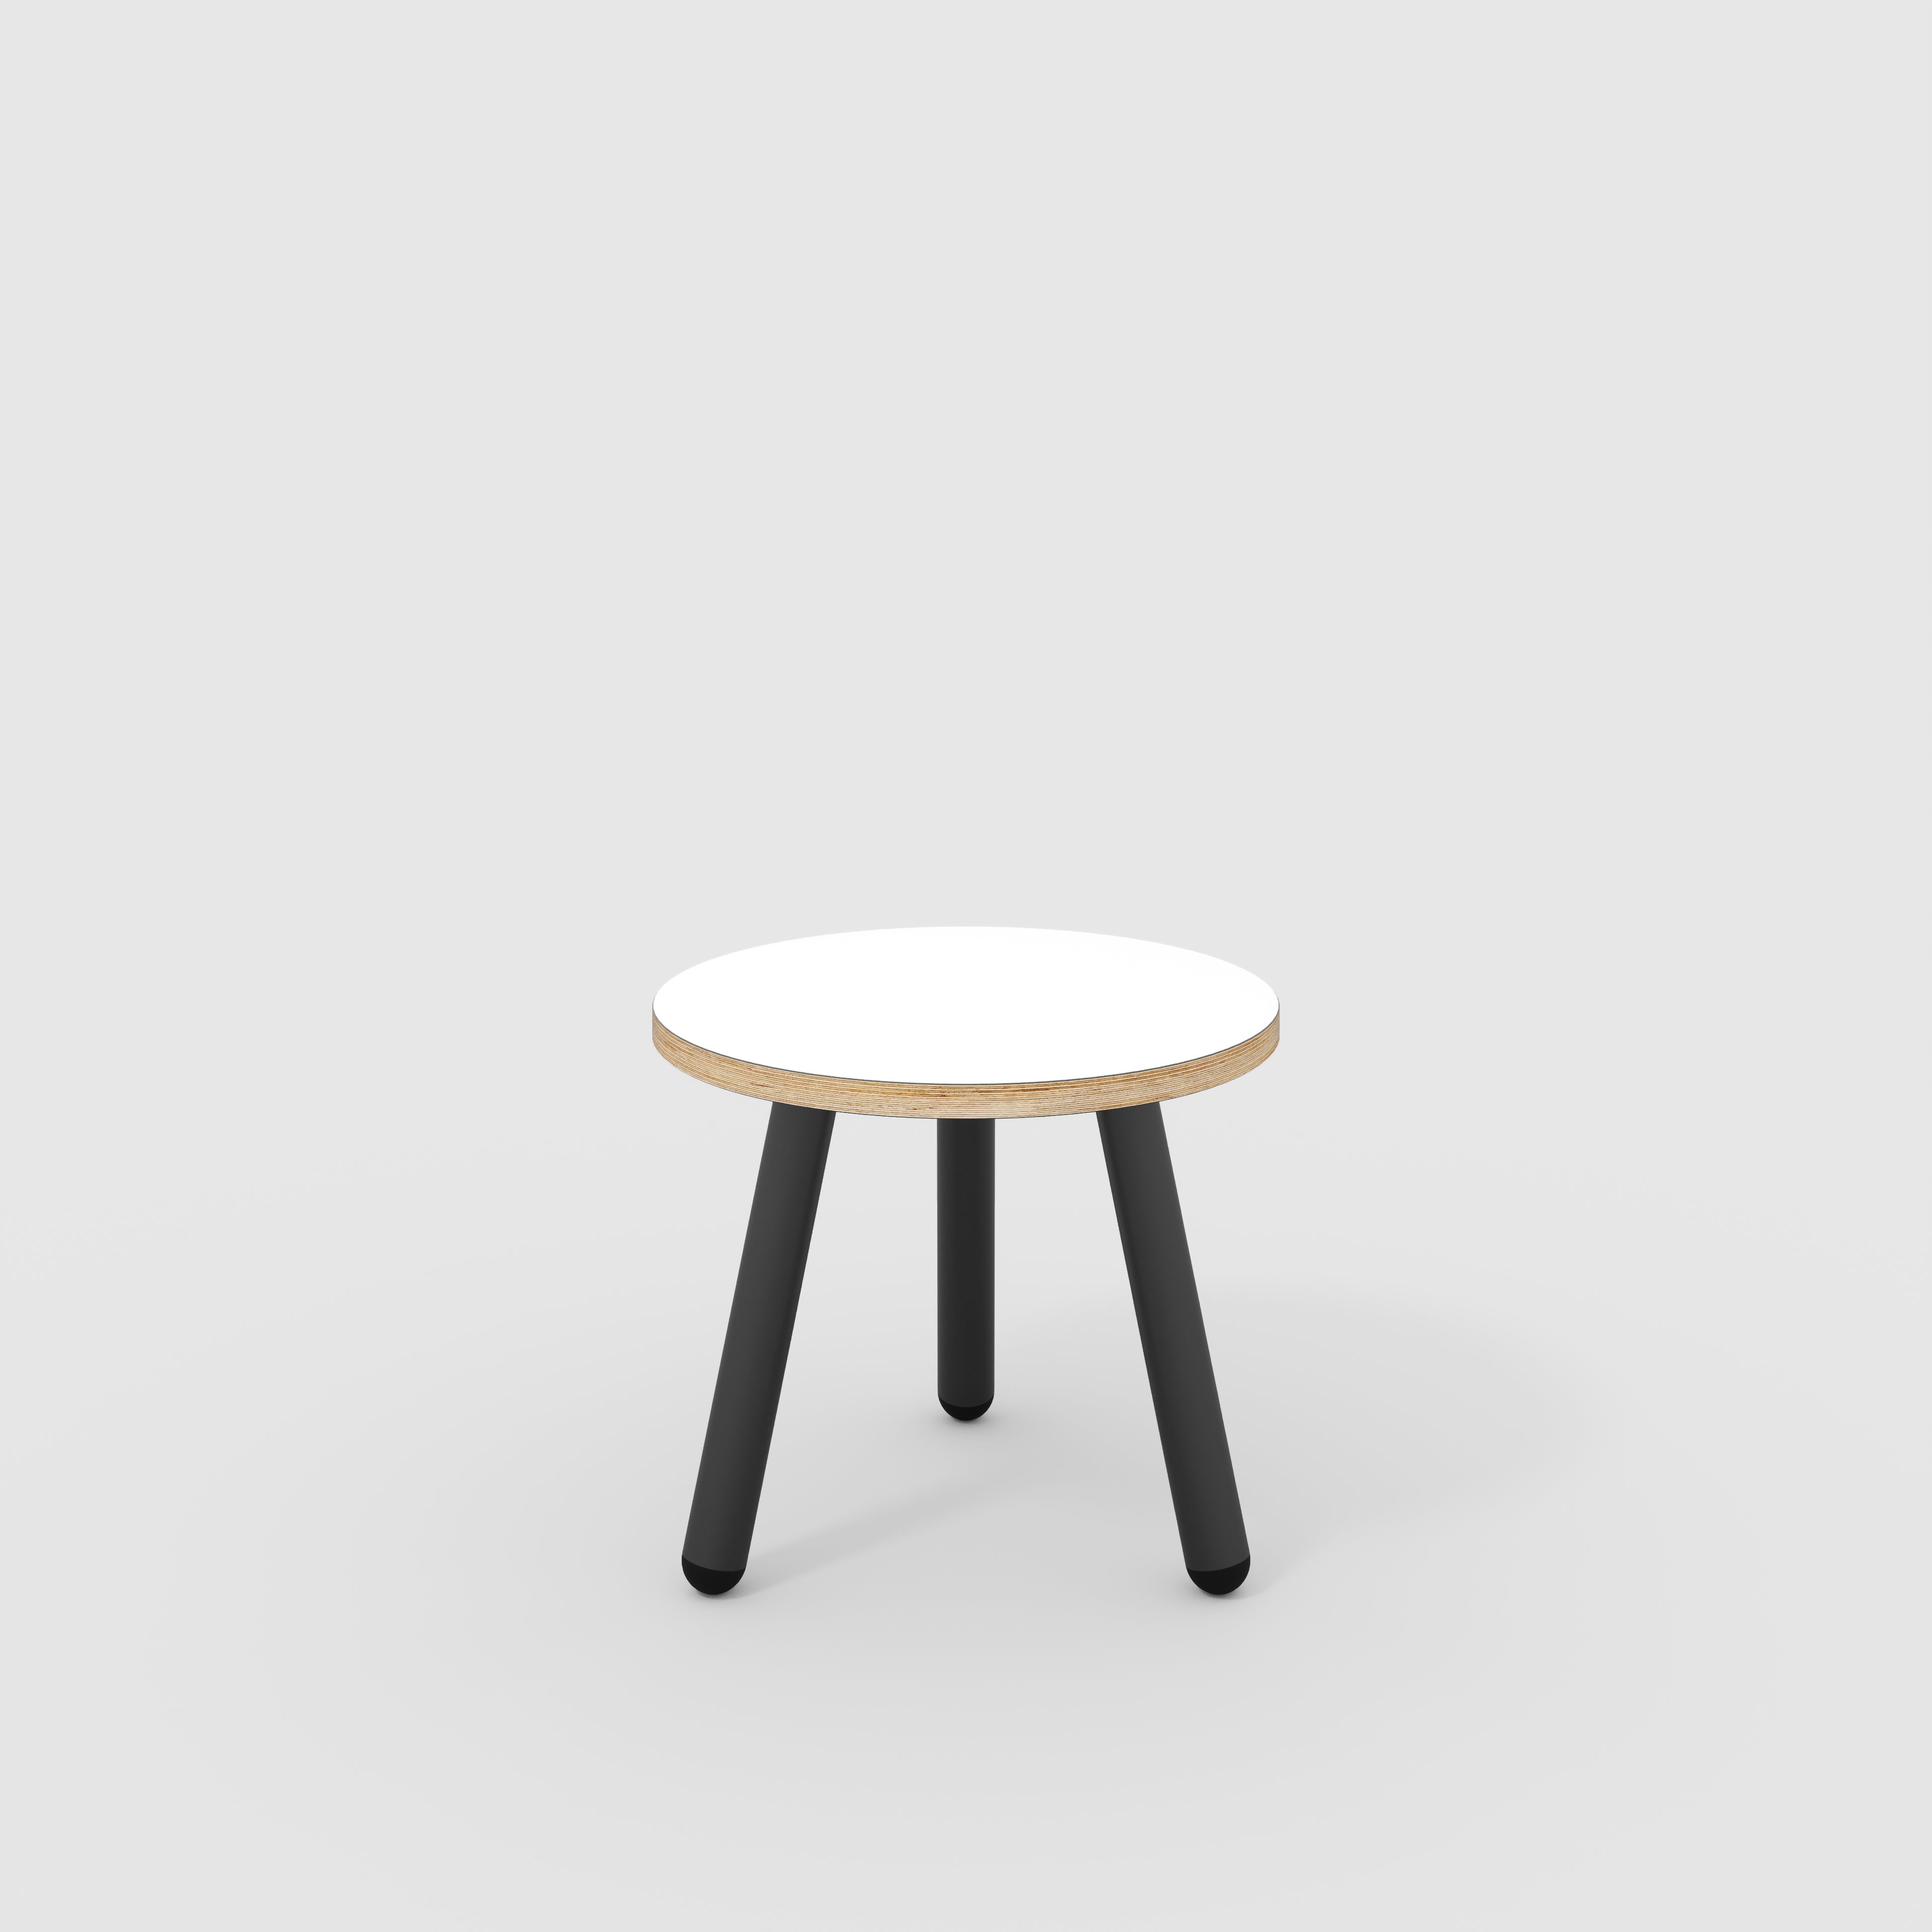 Round Side Table with Black Round Single Pin Legs - Formica White - 500(w) x 500(d) x 425(h)